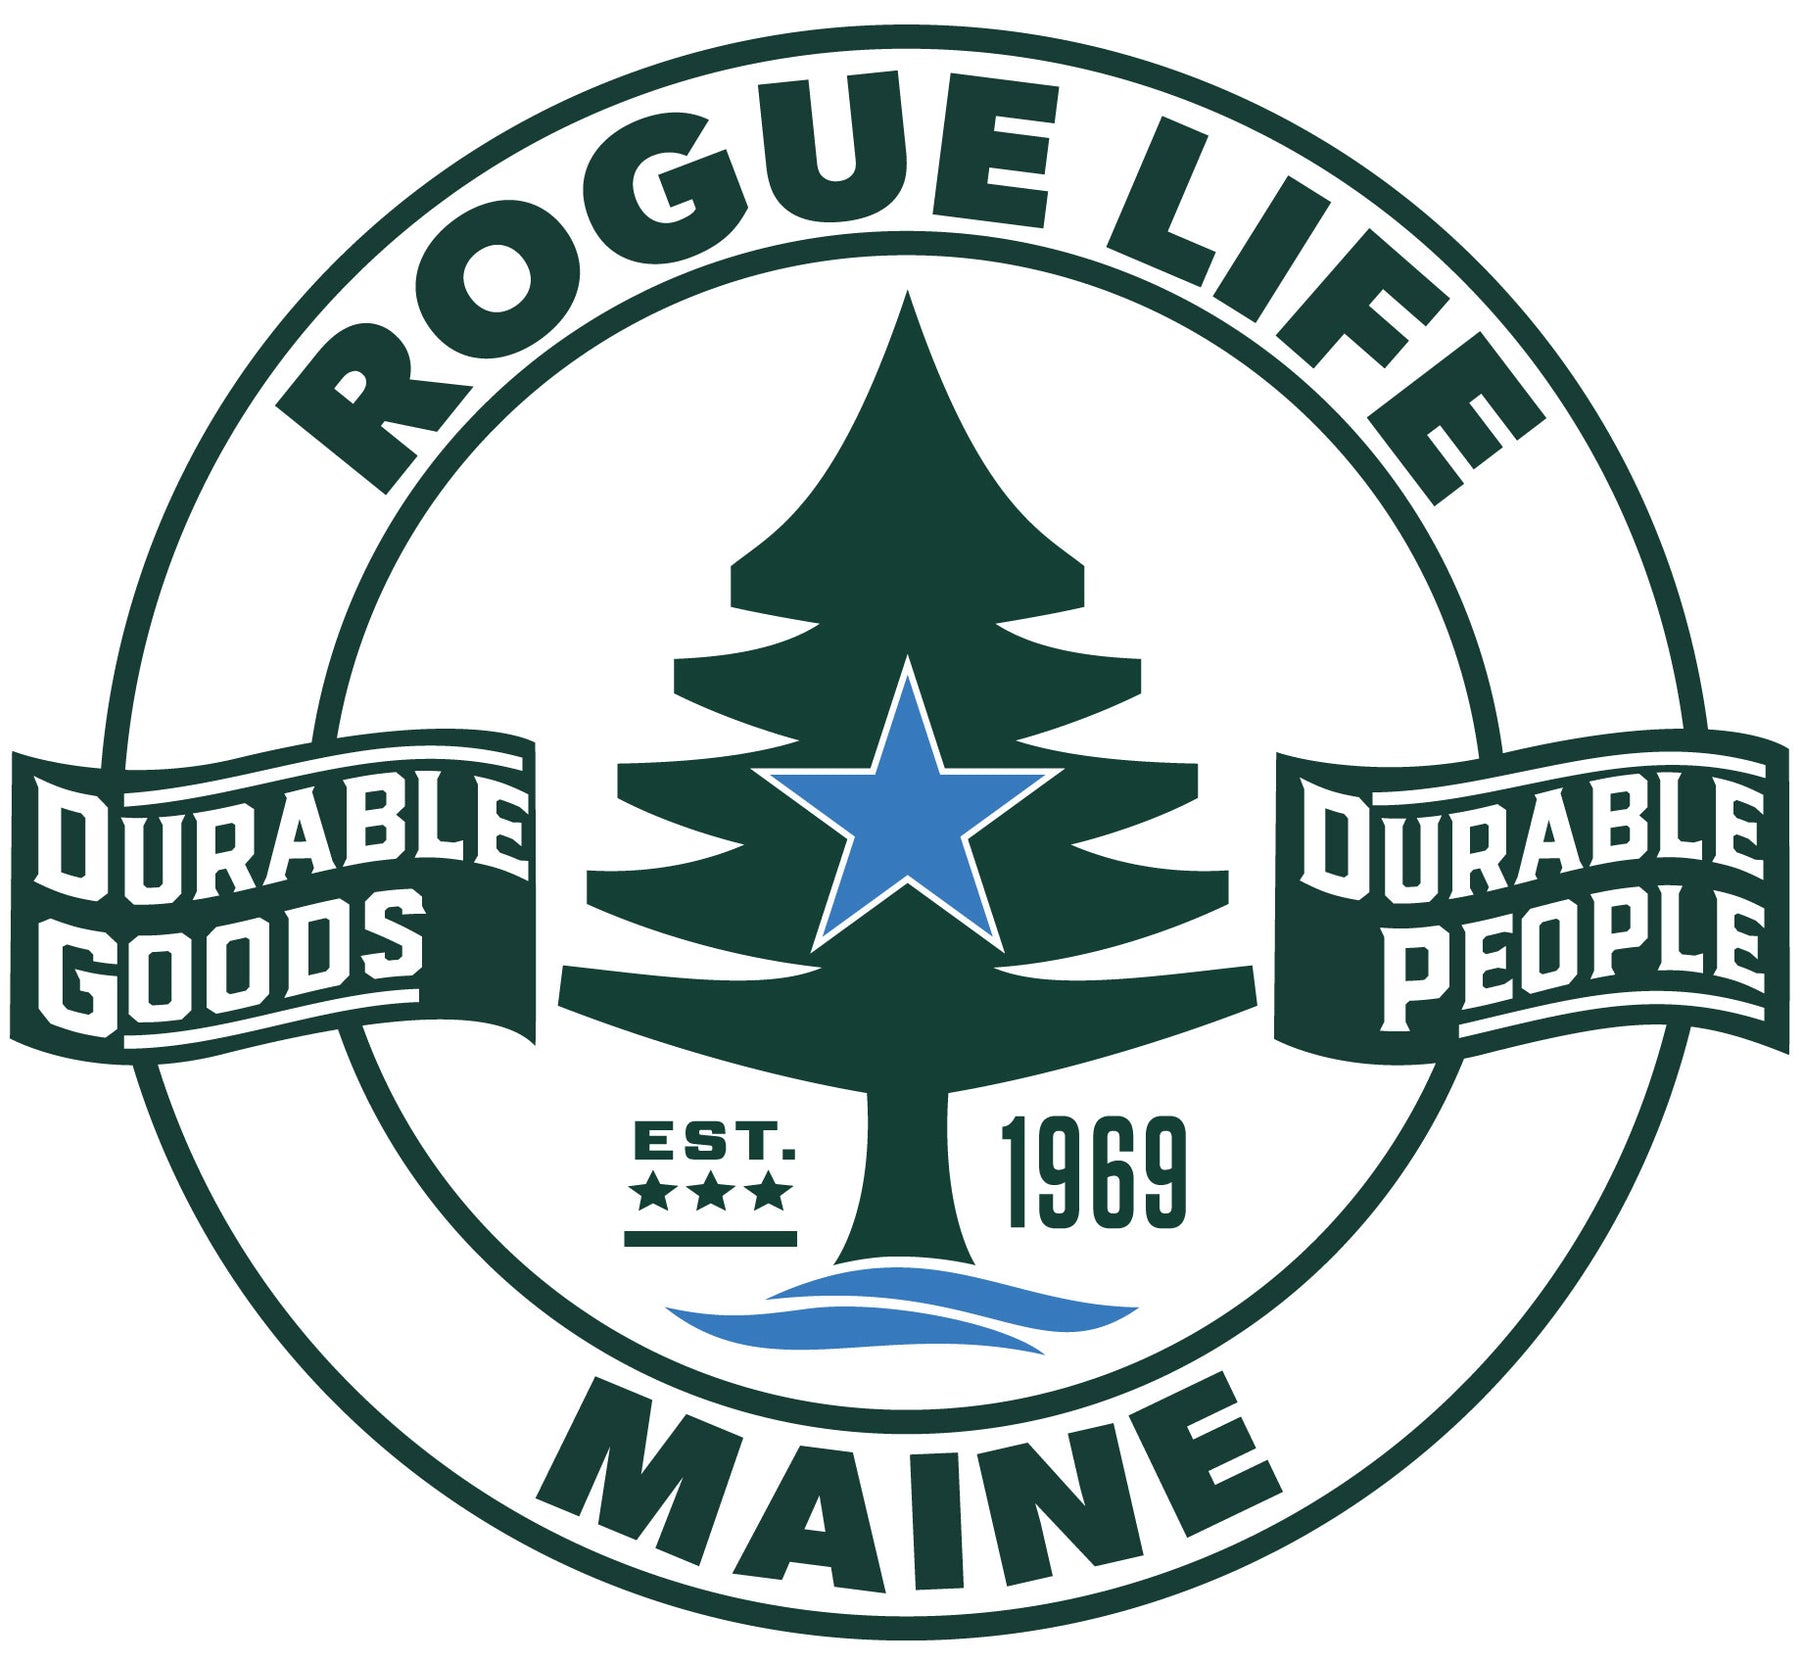 New Commercial — ROGUE LIFE MAINE